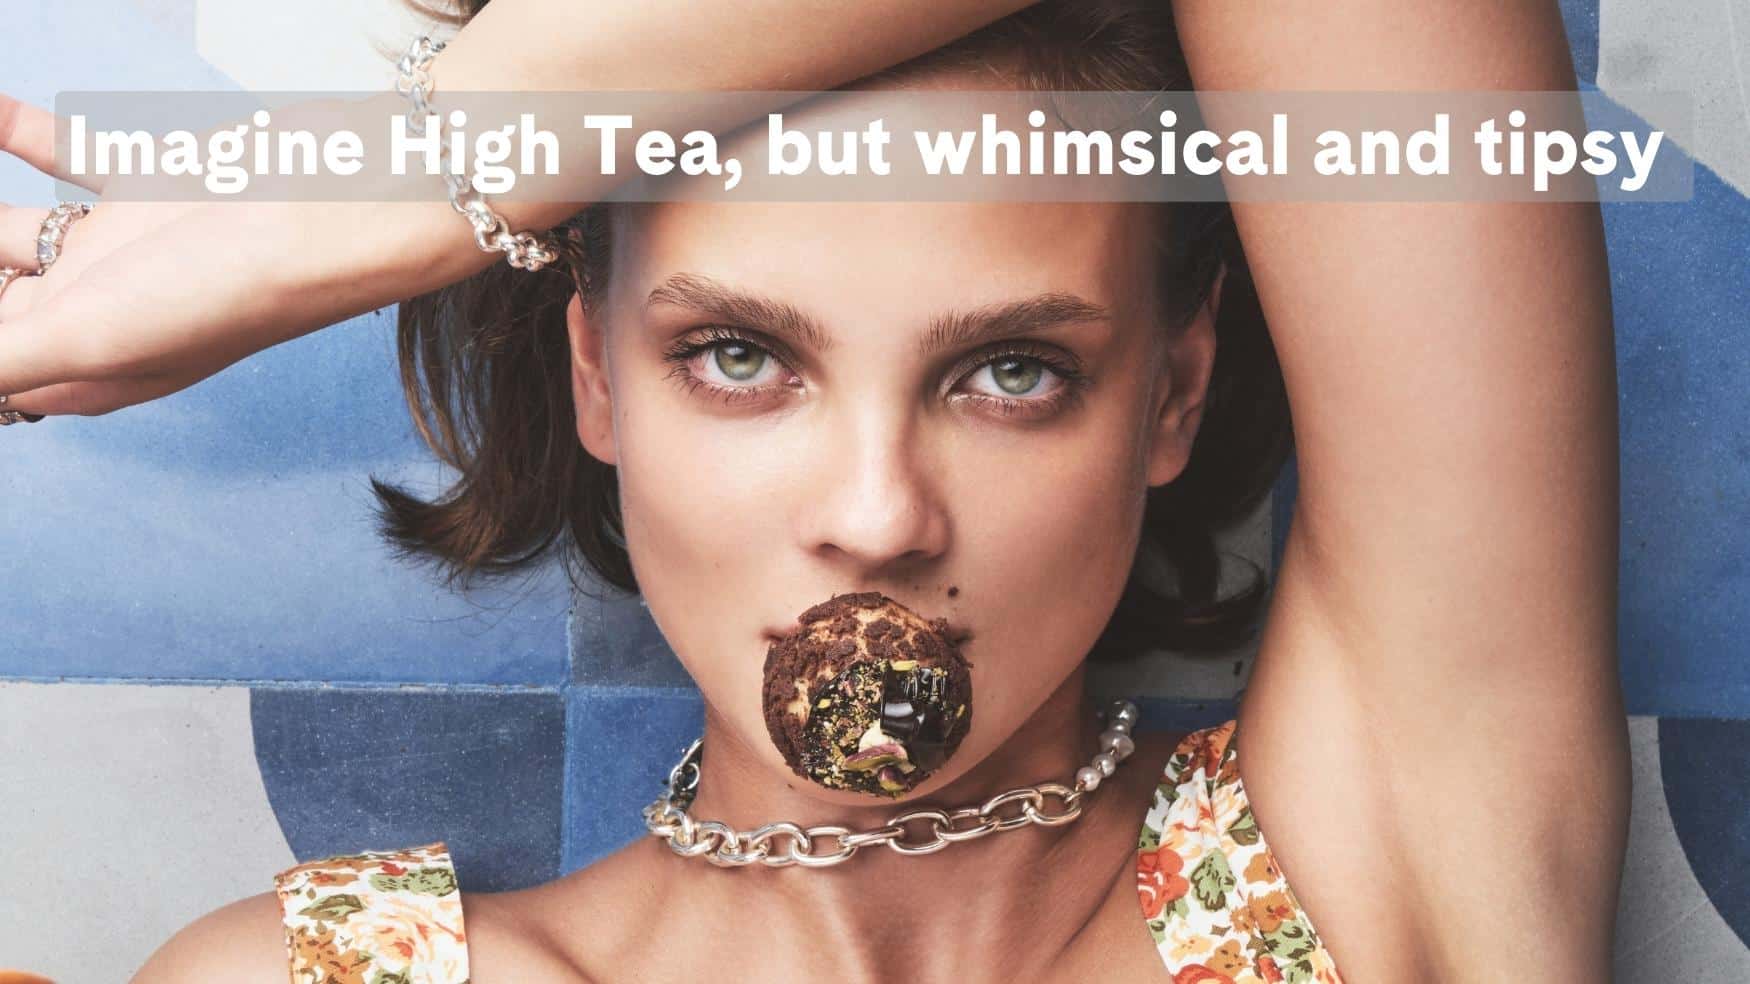 Imagine High Tea, but whimsical and tipsy!